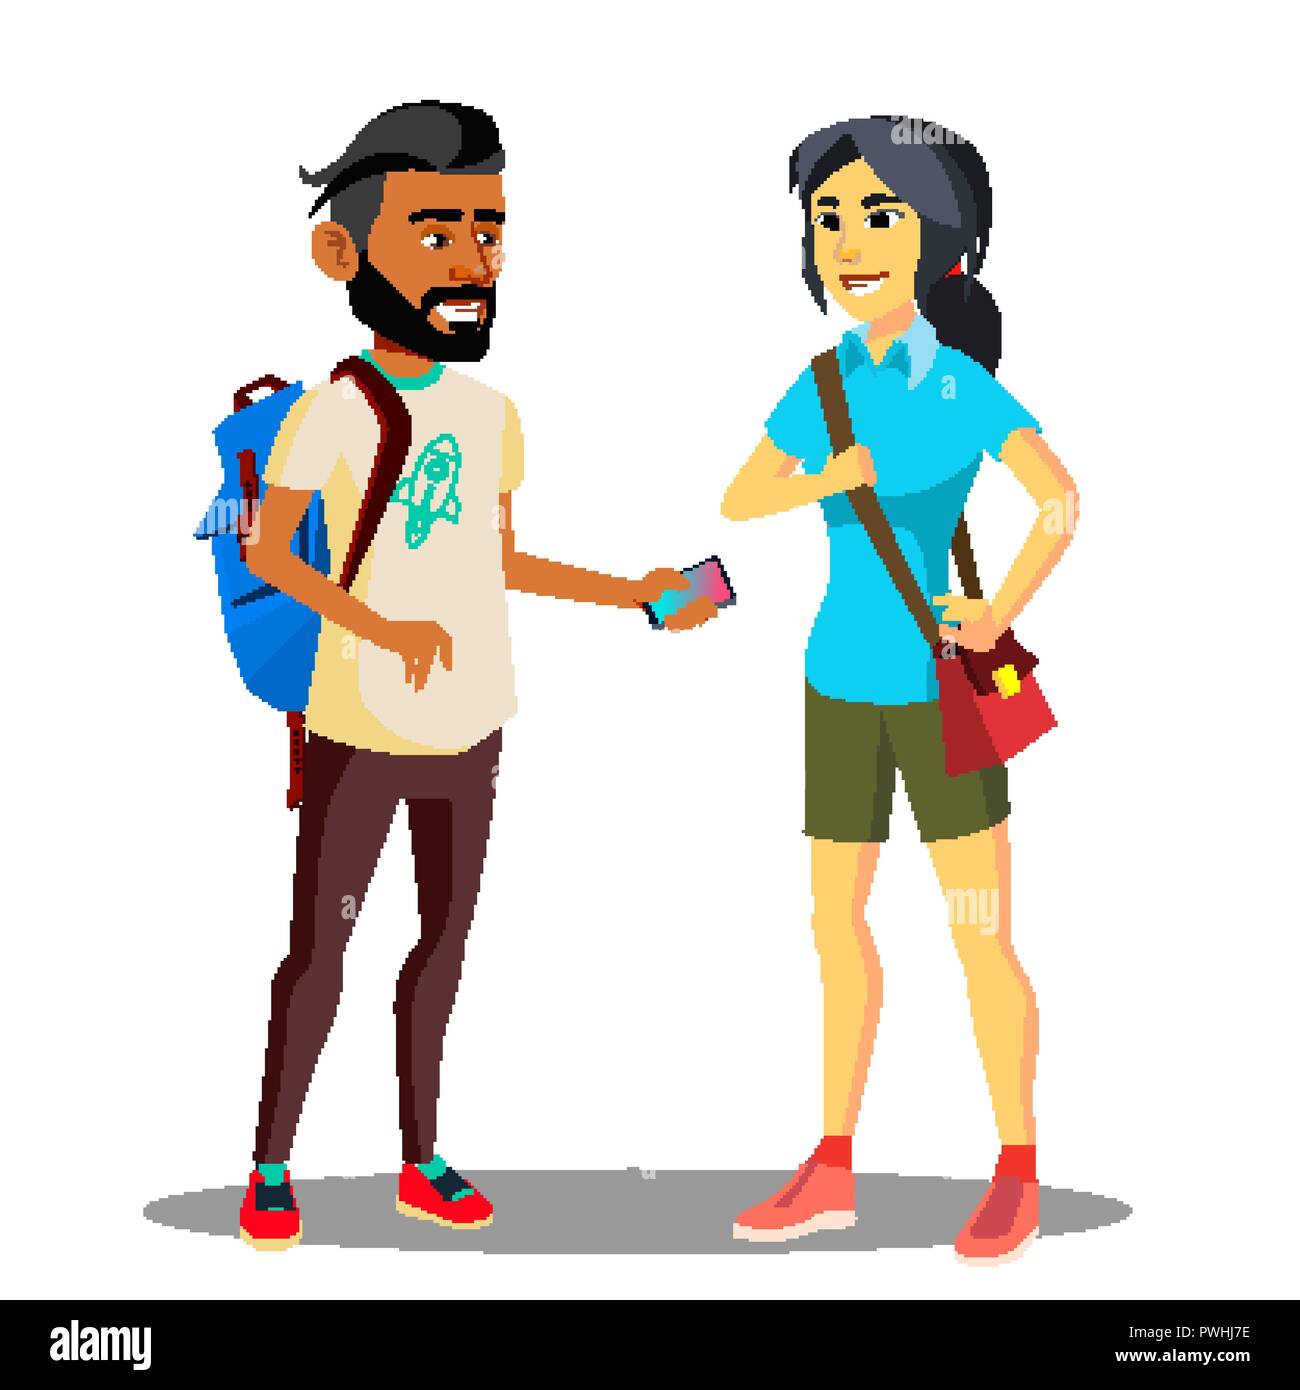 Smiling Muslim And Asian Student With Backpack Vector. Isolated Illustration Stock Vector